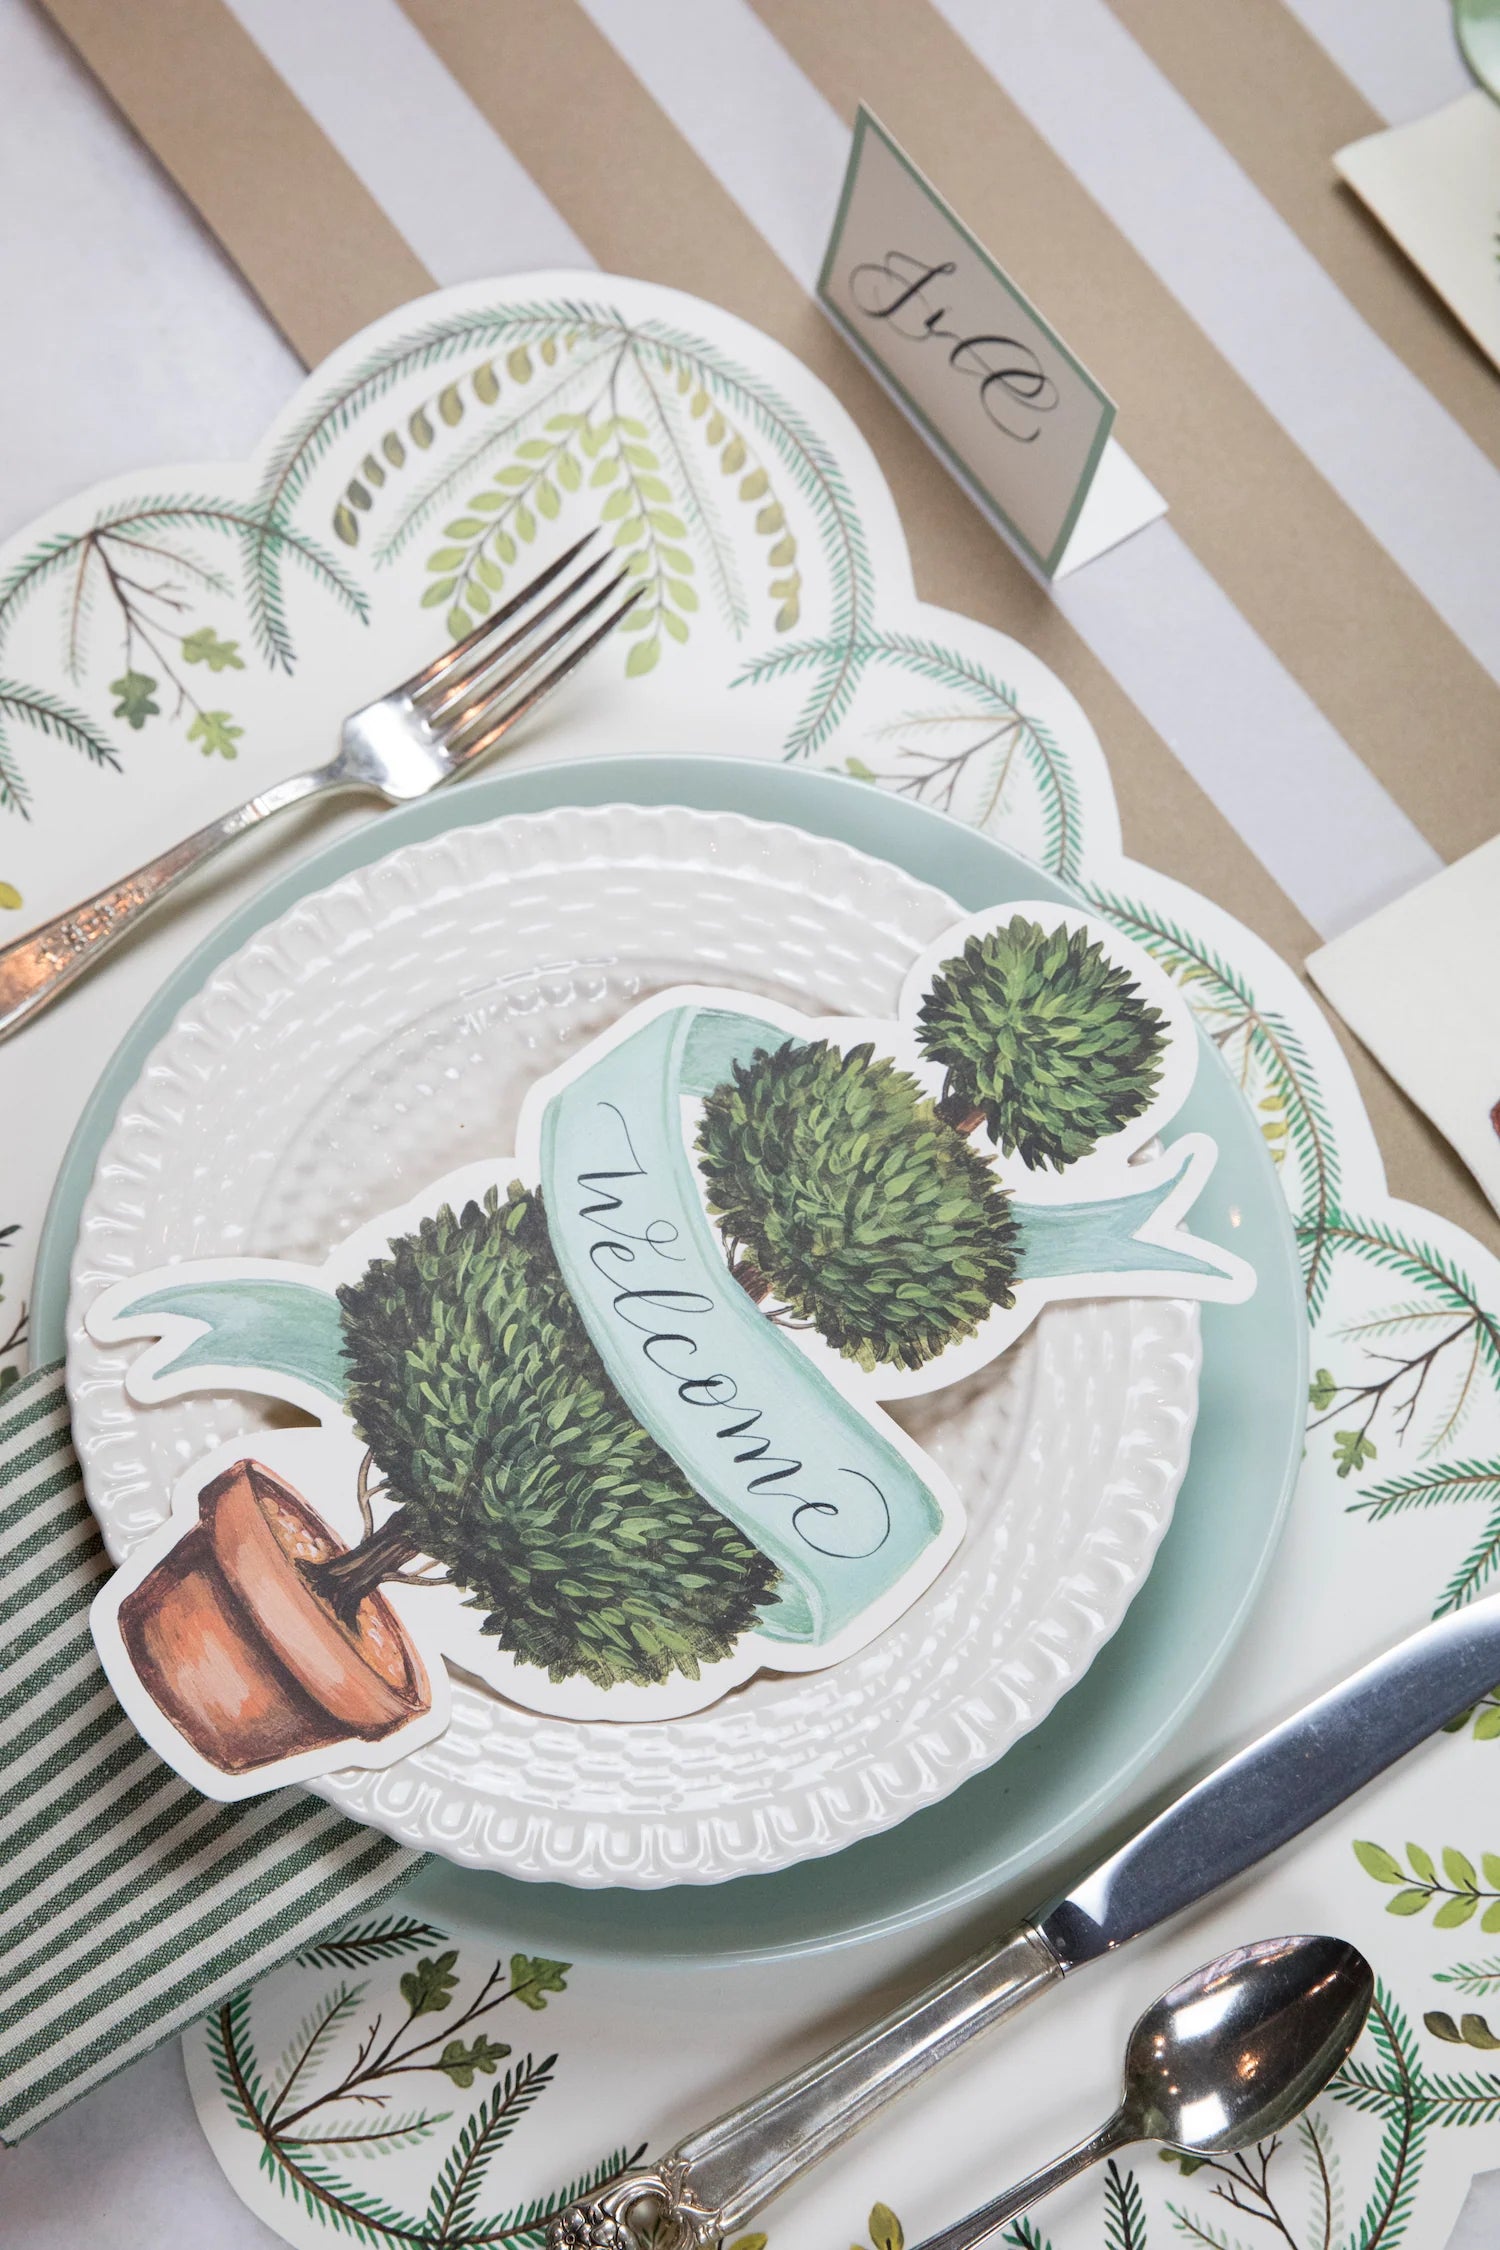 Scalloped Seedling Die Cut Placemat